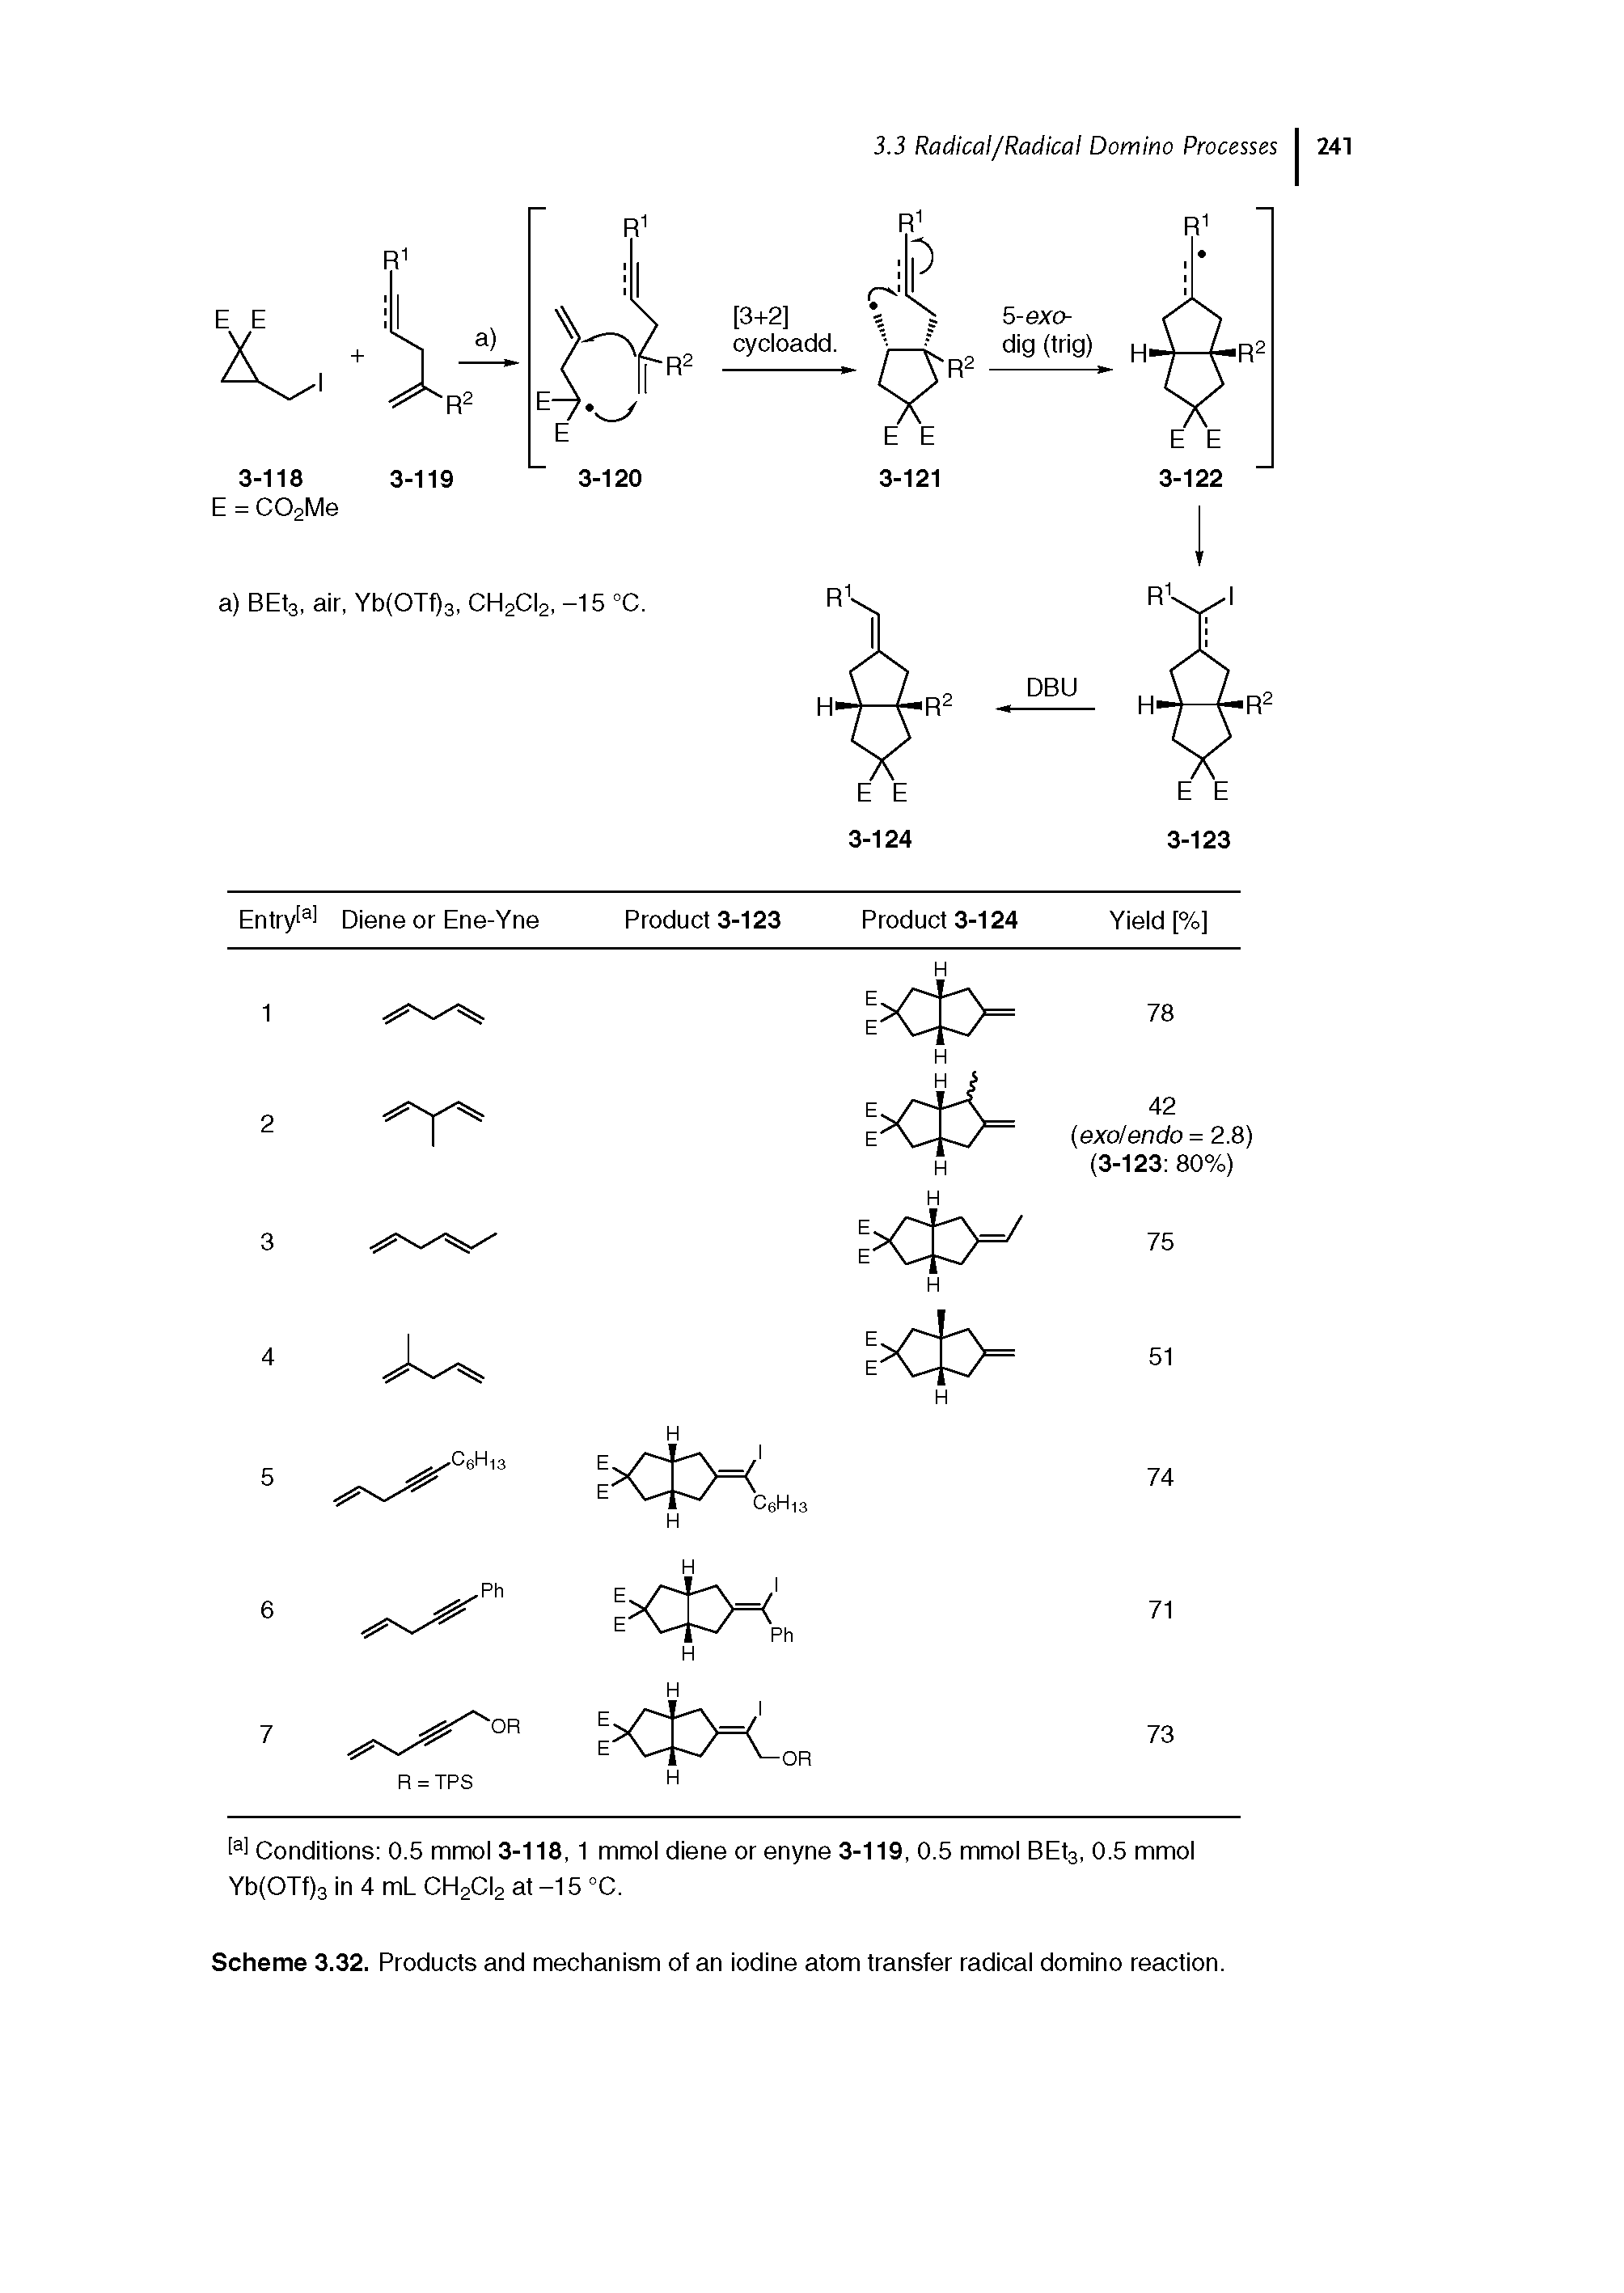 Scheme 3.32. Products and mechanism of an iodine atom transfer radical domino reaction.